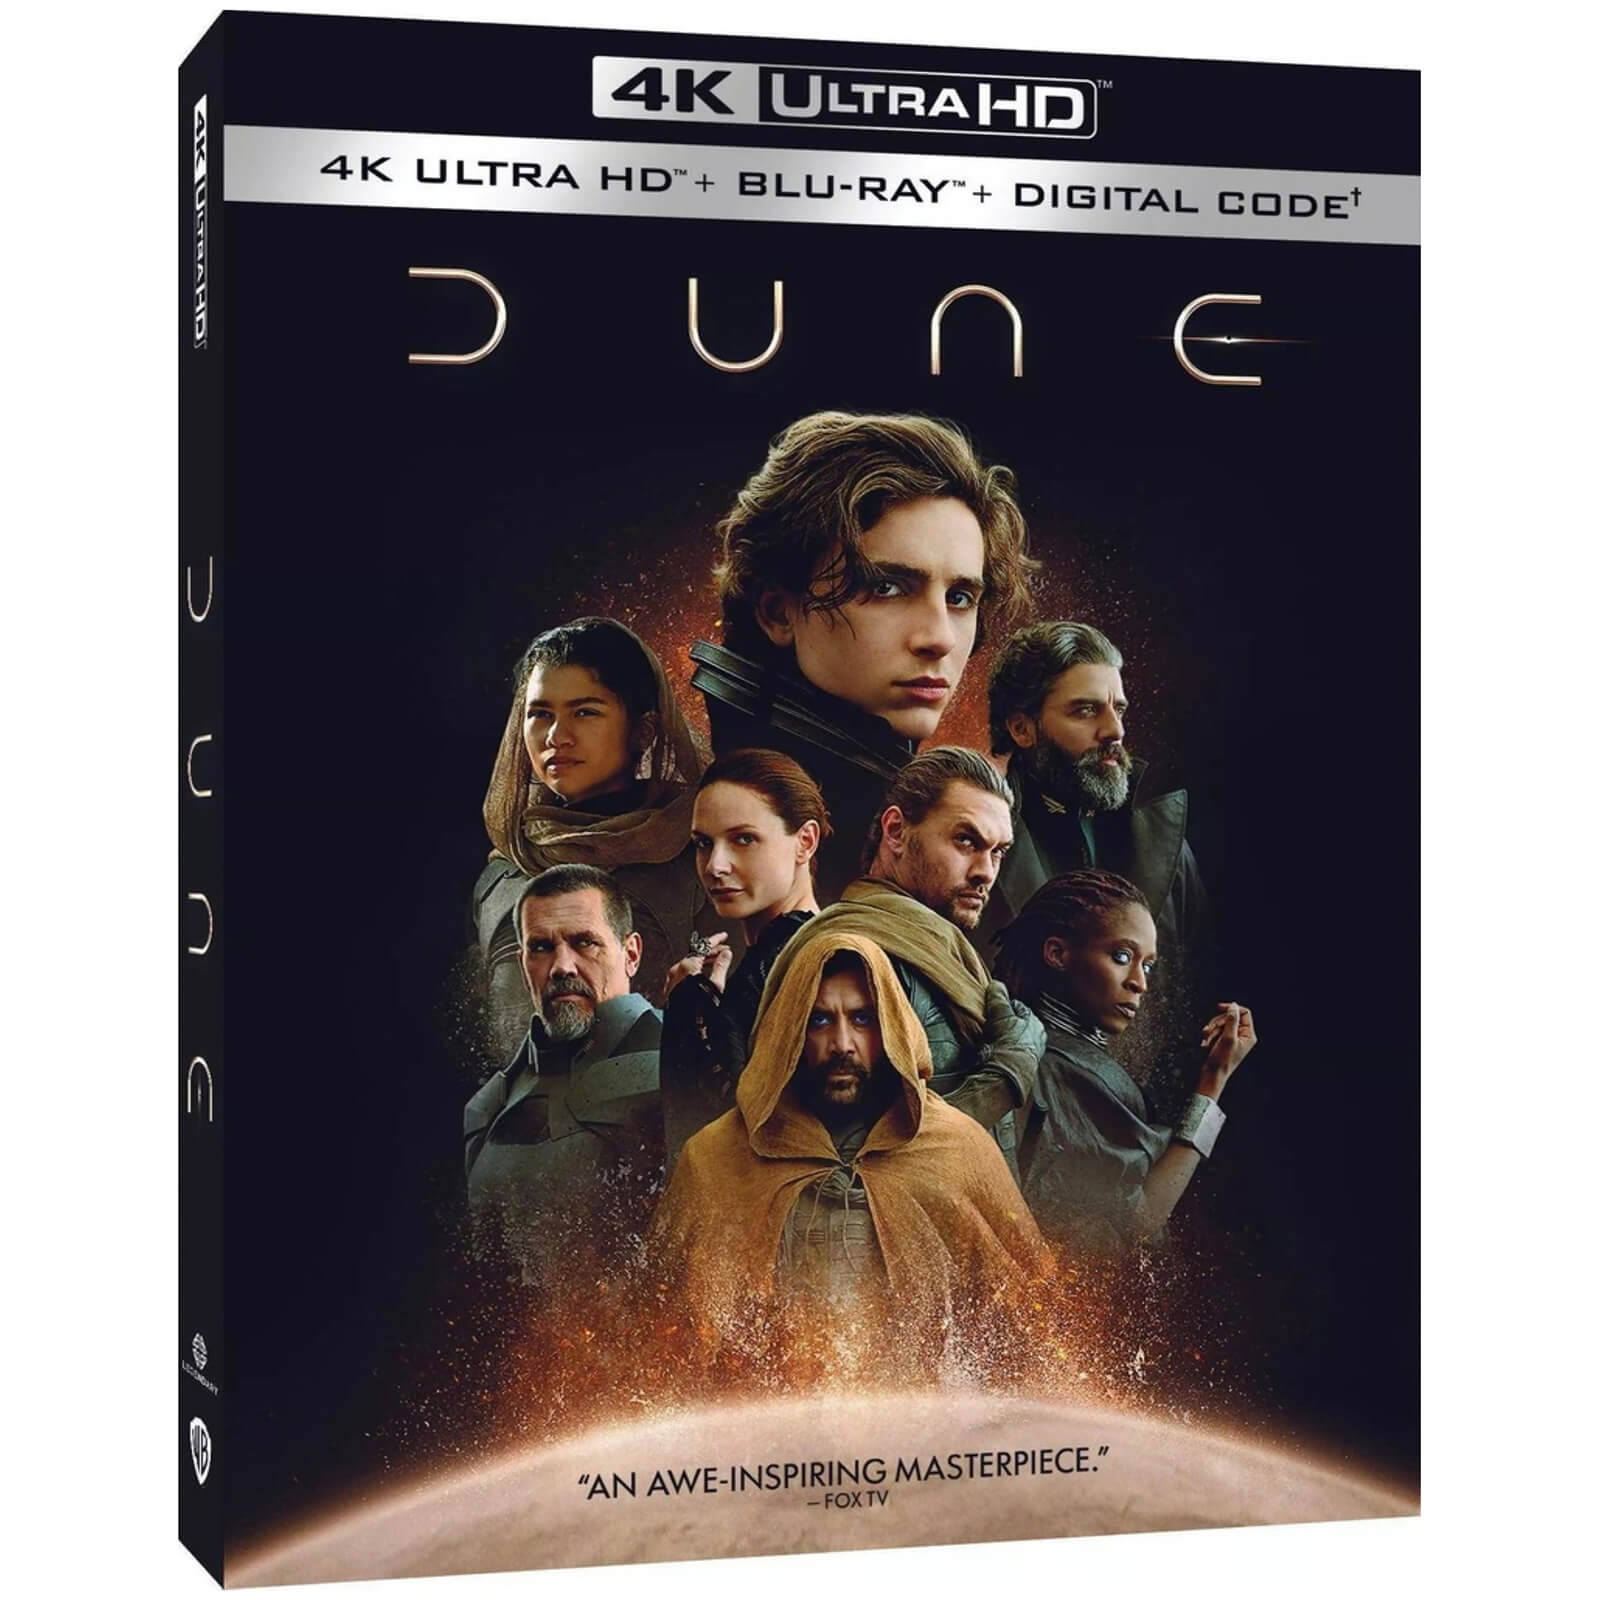 Dune - 4K Ultra HD (Includes Blu-ray) (US Import)